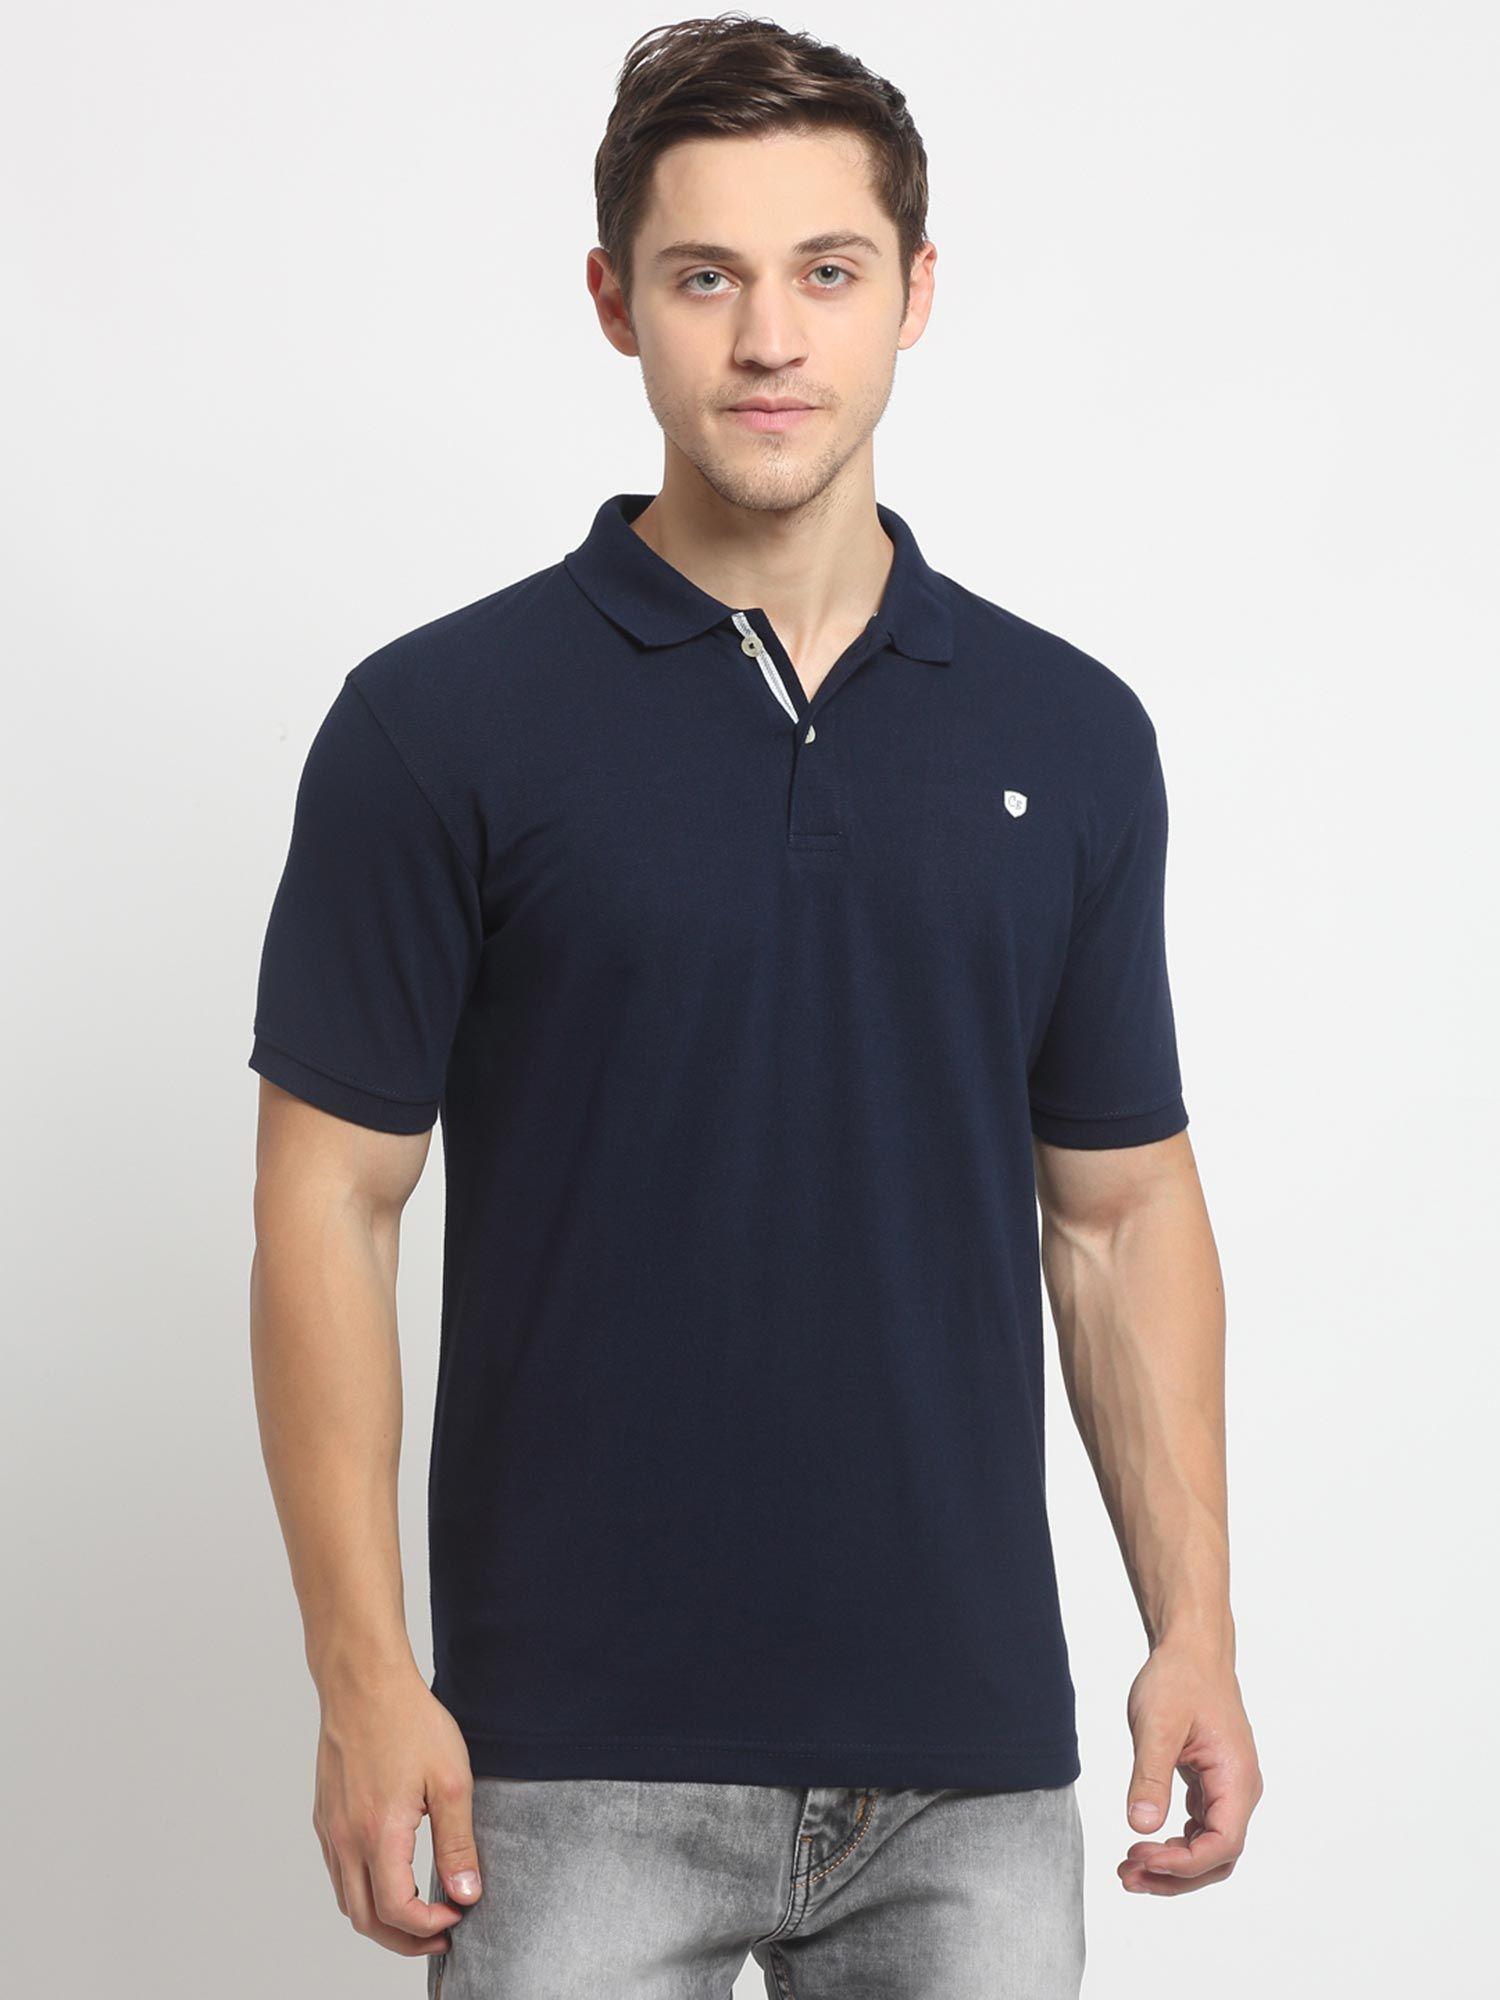 navy blue solid polo t-shirt